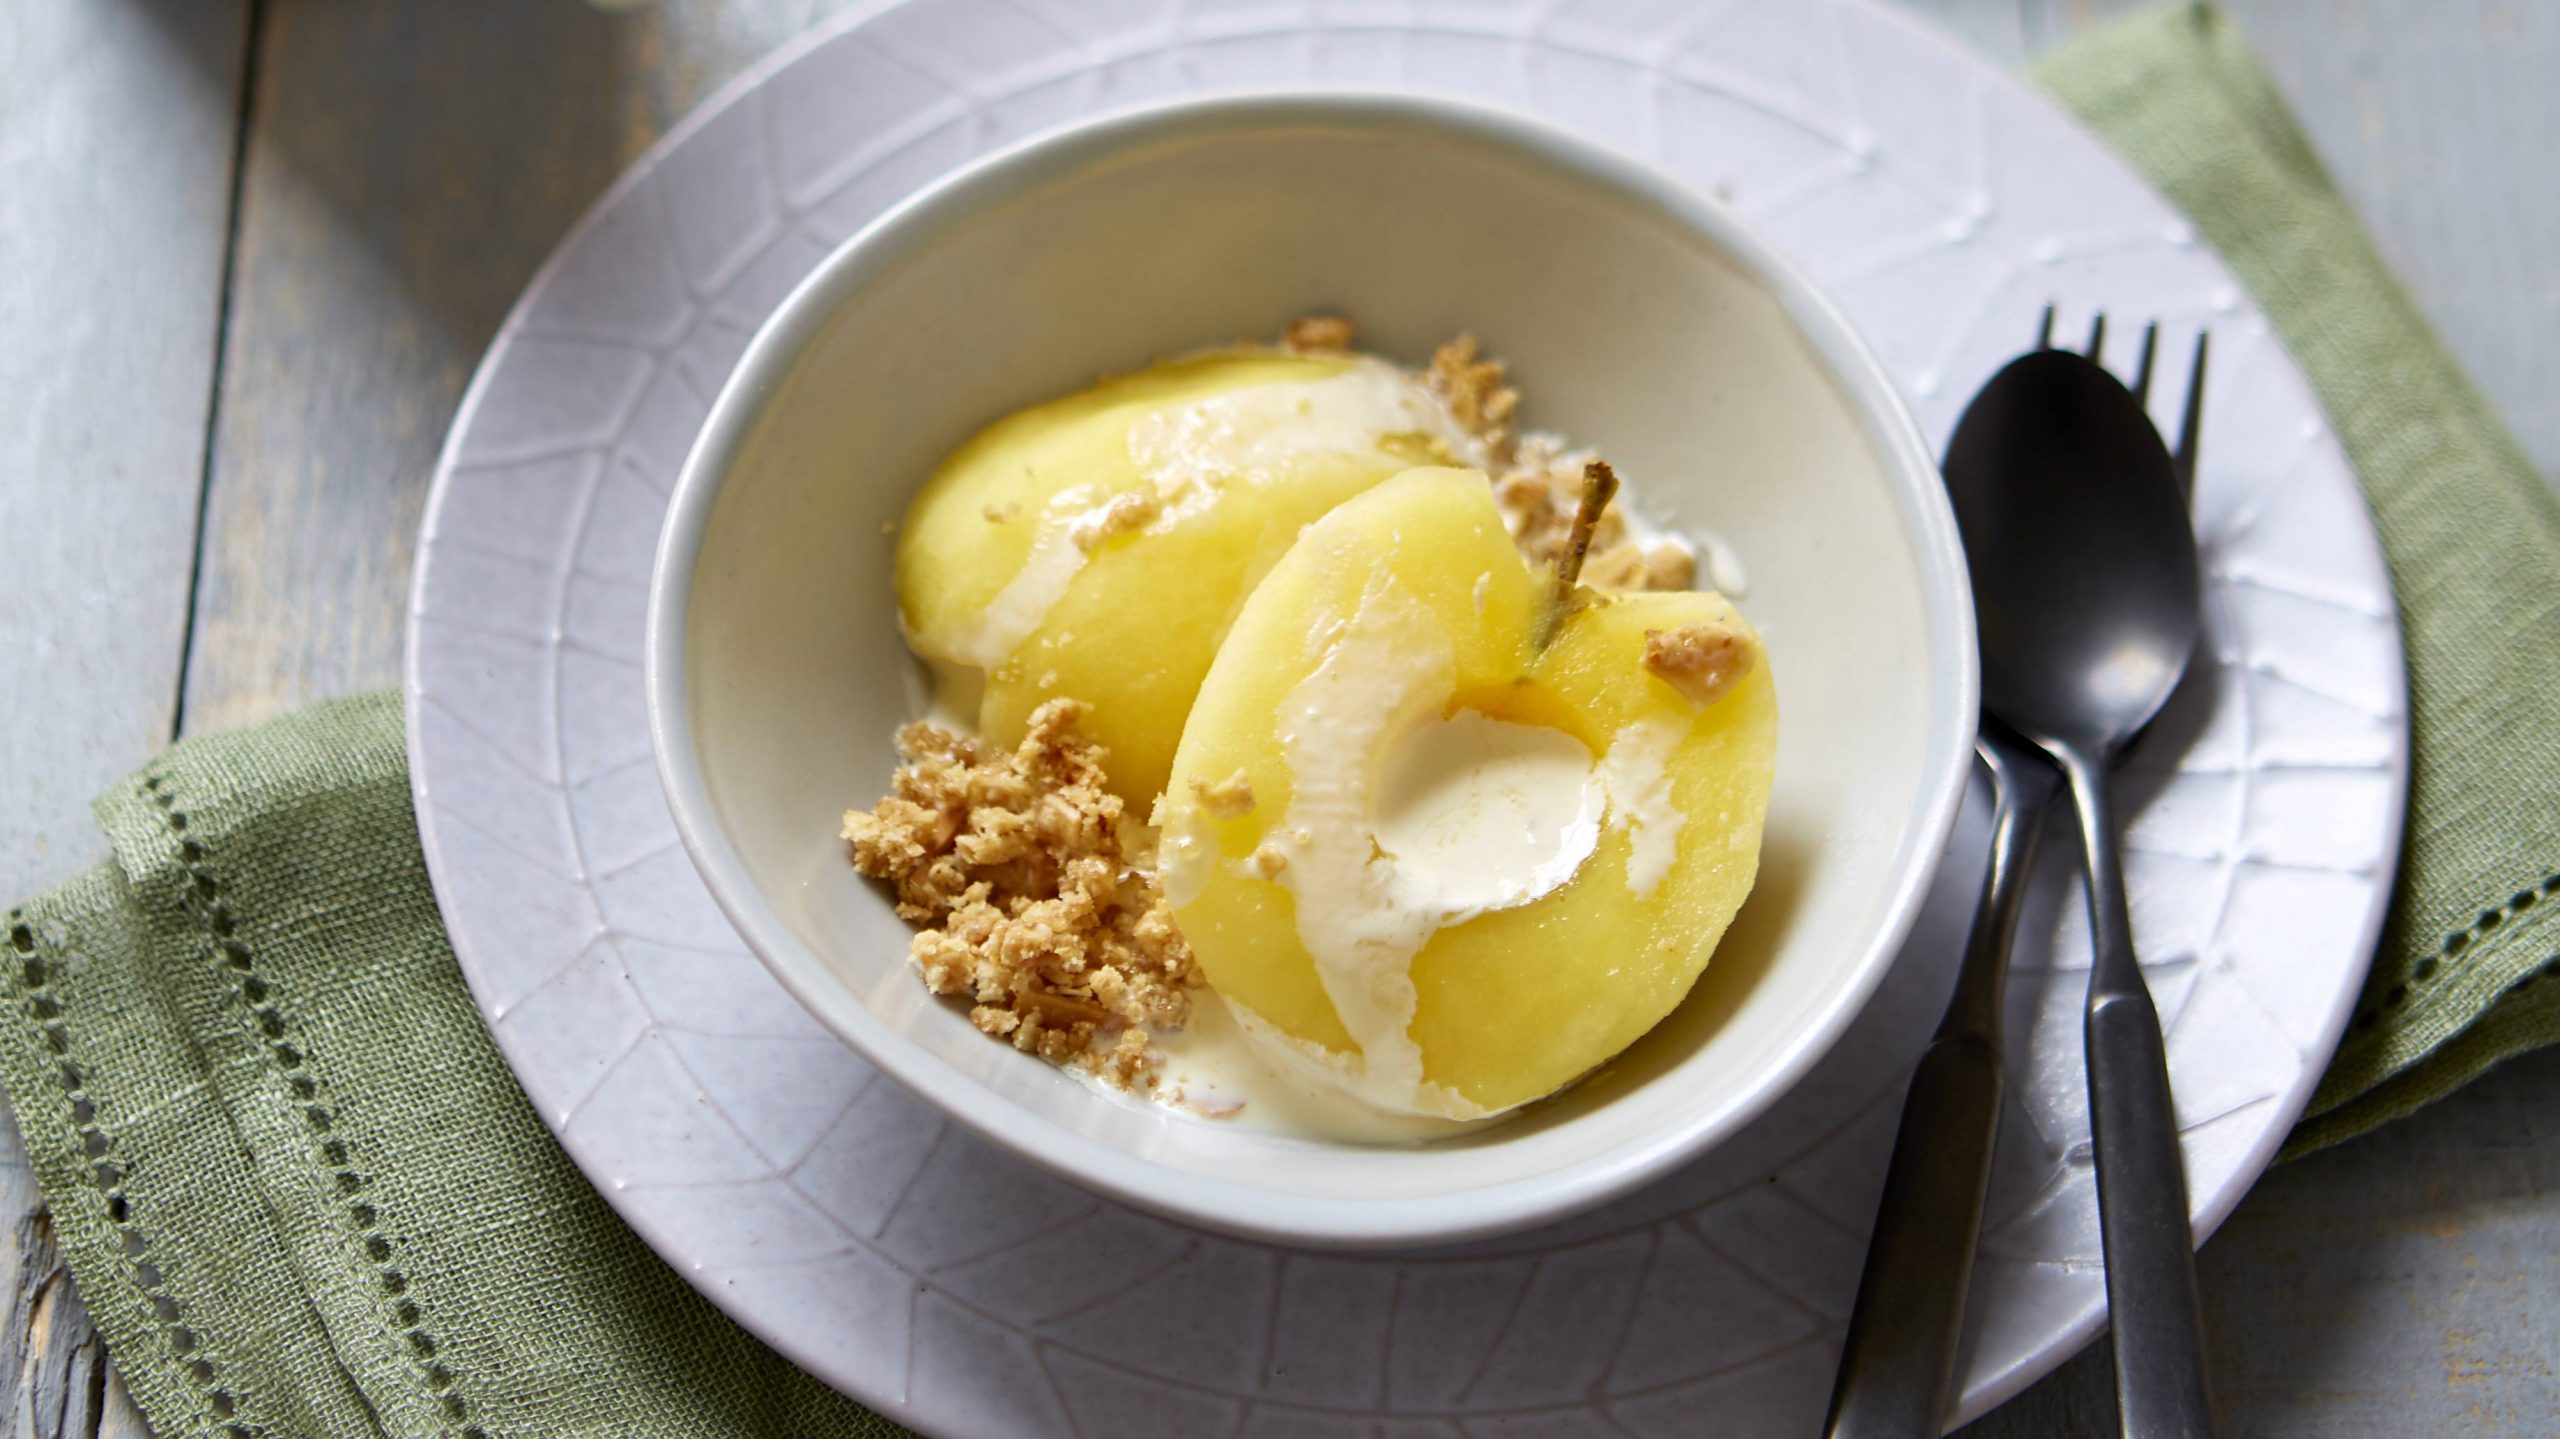 Chardonnay poached apples with crunchy granola